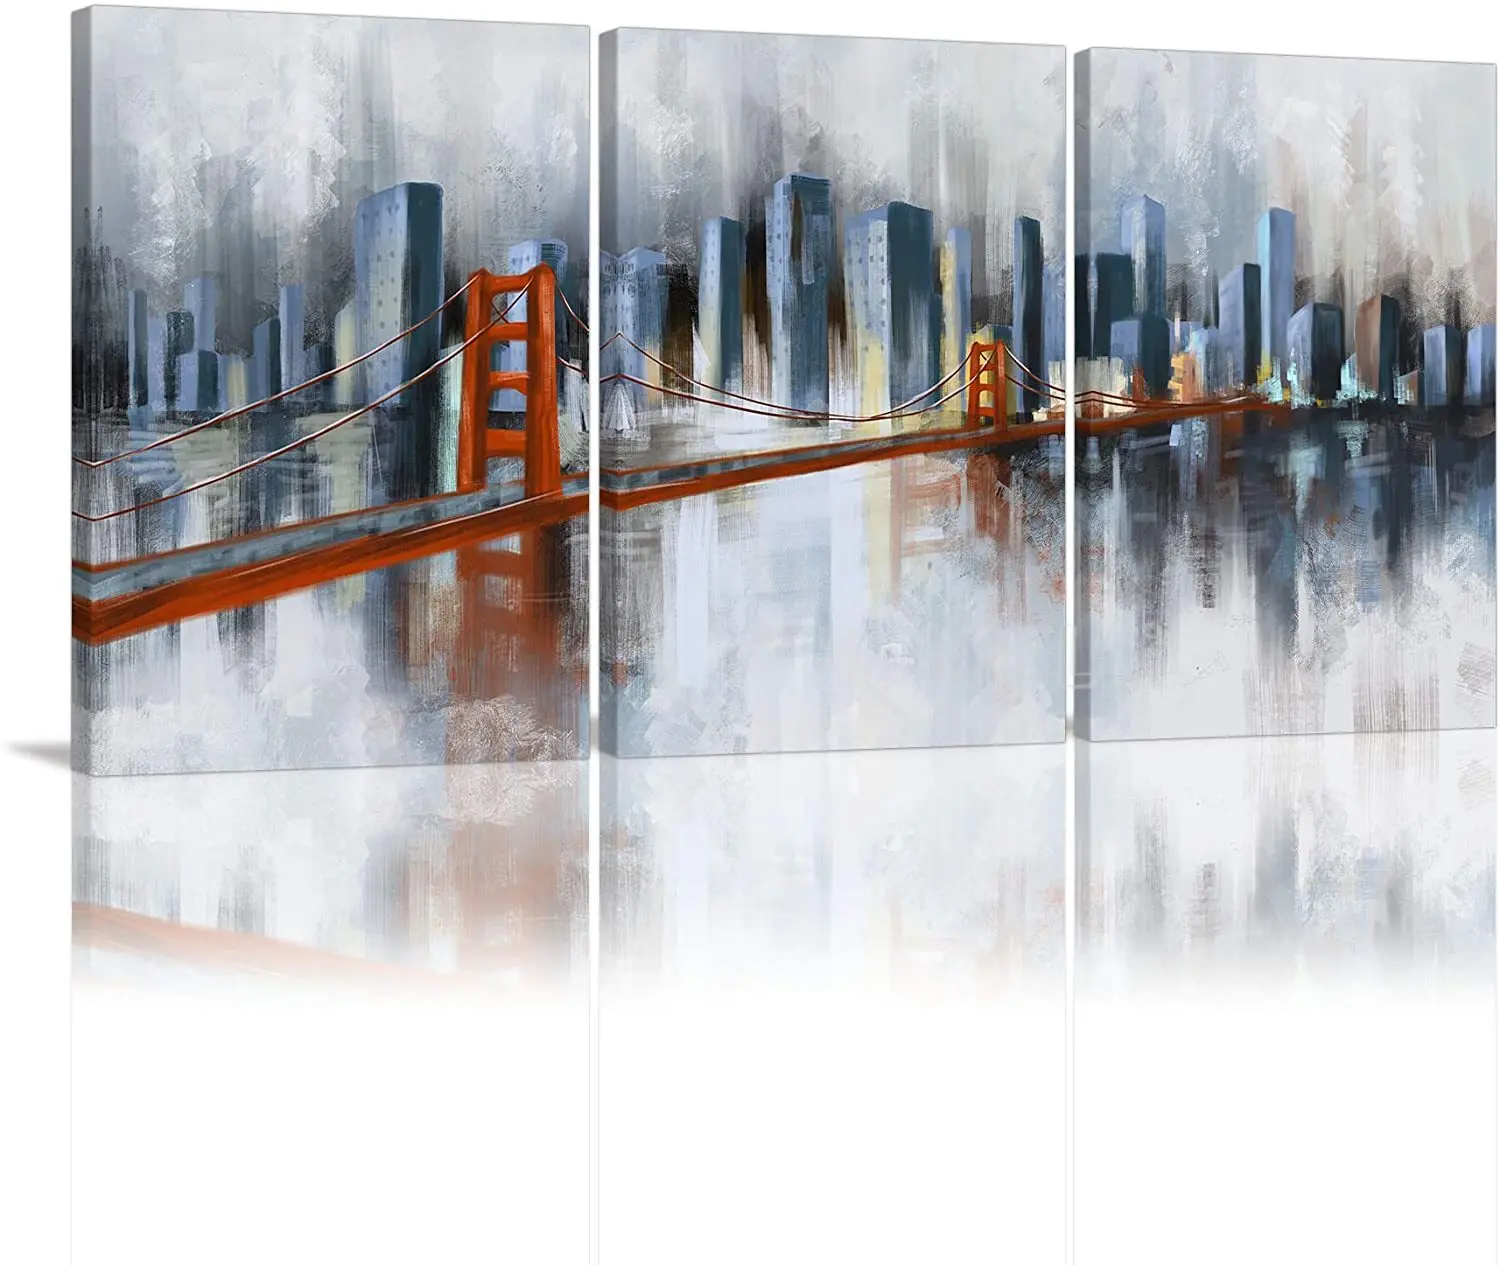 

Abstract Canvas Wall Art 3 Panels Kitchen Decor San Francisco Bridge Print Poster Picture Artworks For Bedroom Living Room Gifts